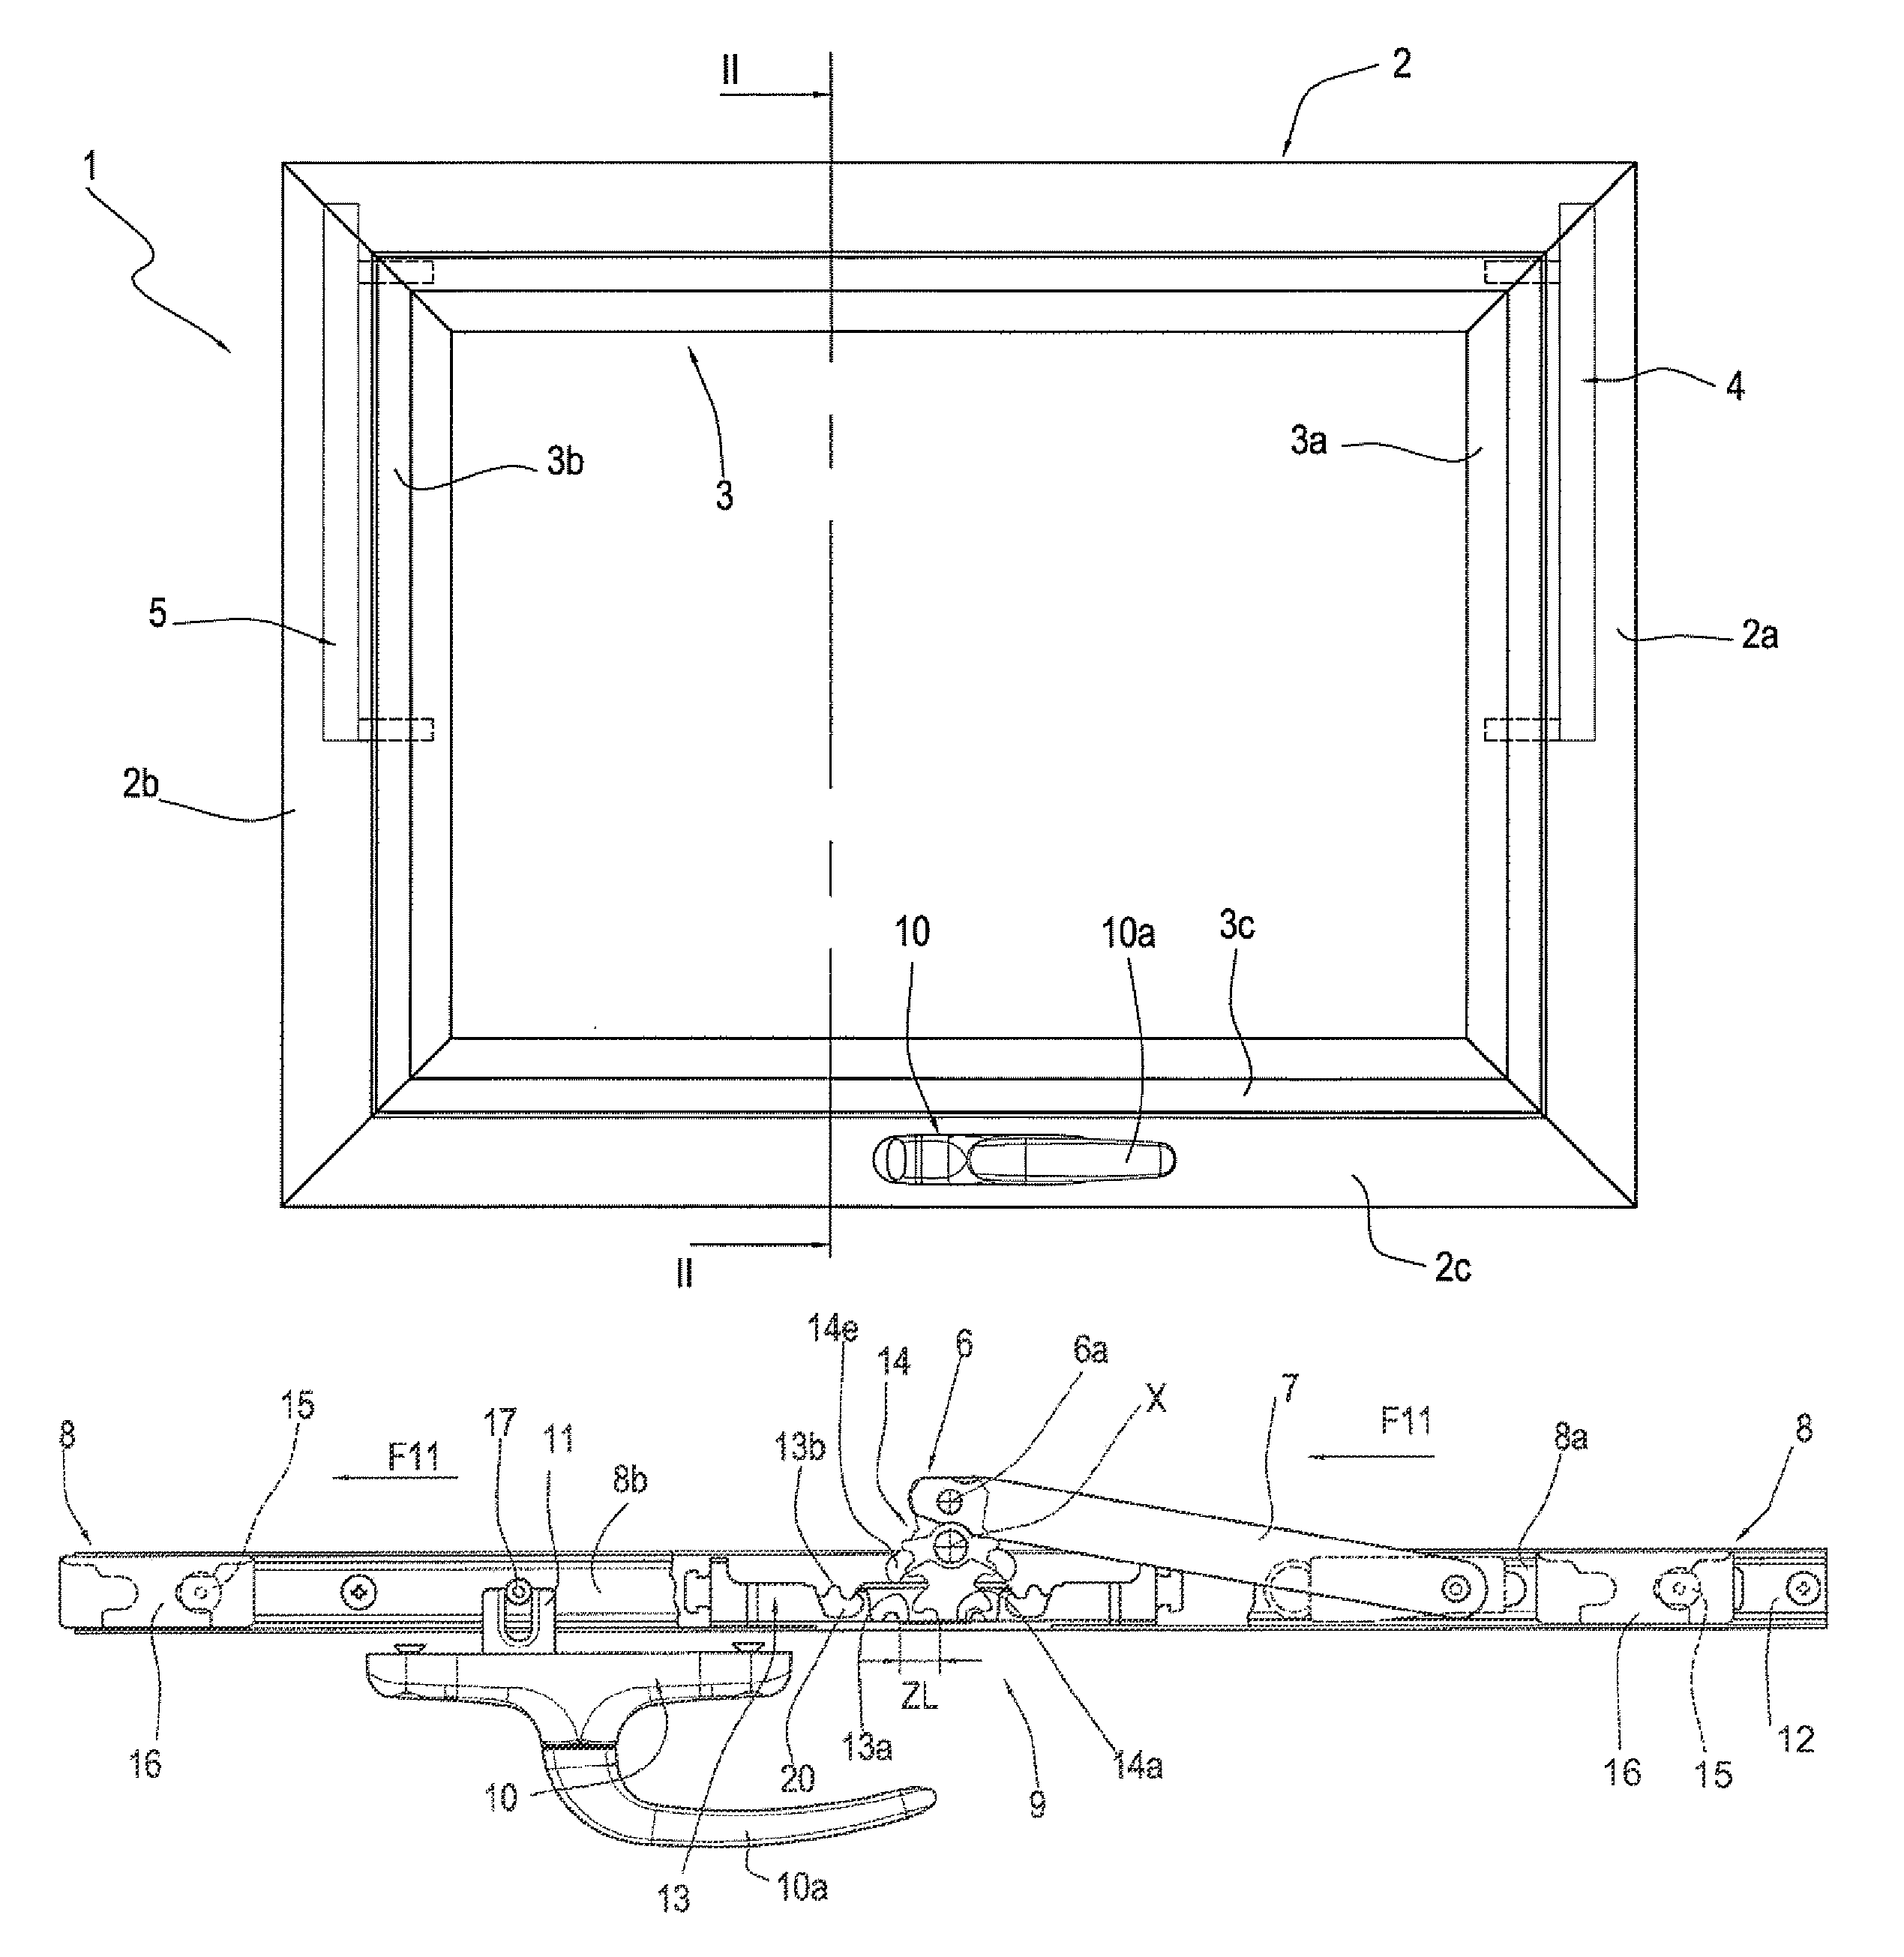 Awning window unit with an operating and closing slide unit for the movable frame of the window unit